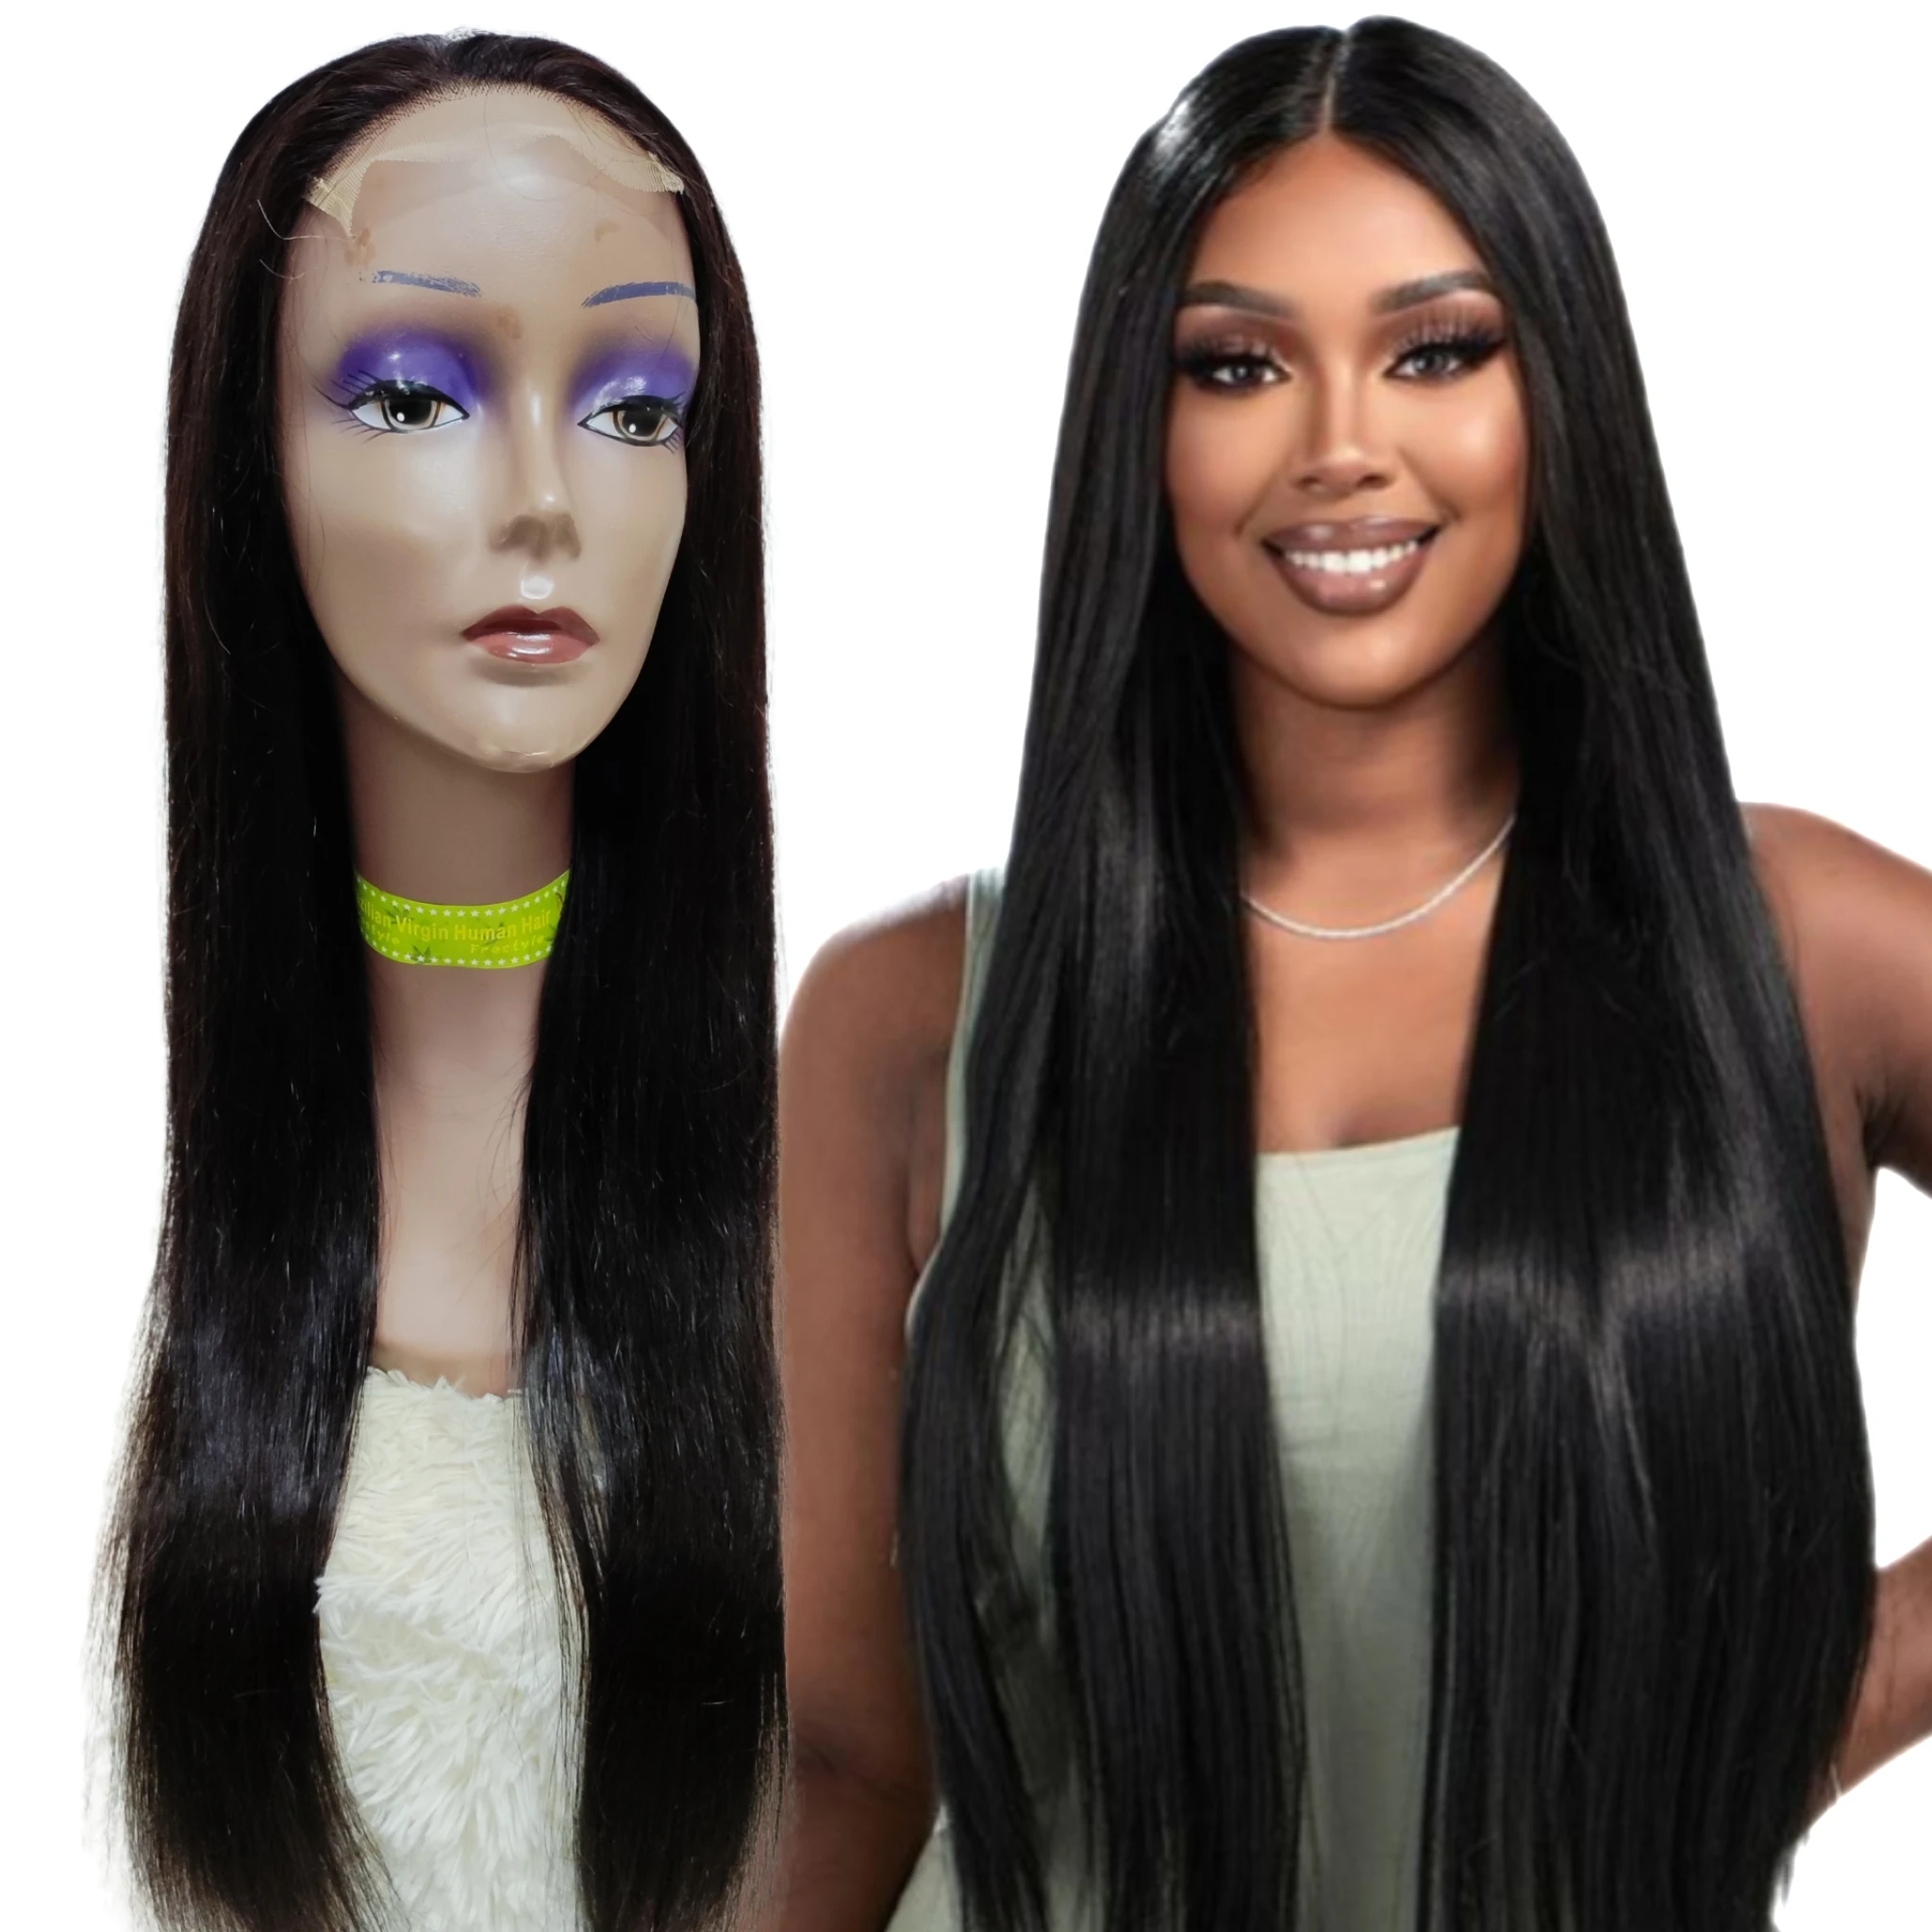 

Letsfly Pre-plucked Straight 4x4 Lace Closure Wigs Brazilian Human Remy Hair 16-30 inch Customize Hair Wigs Free Shipping